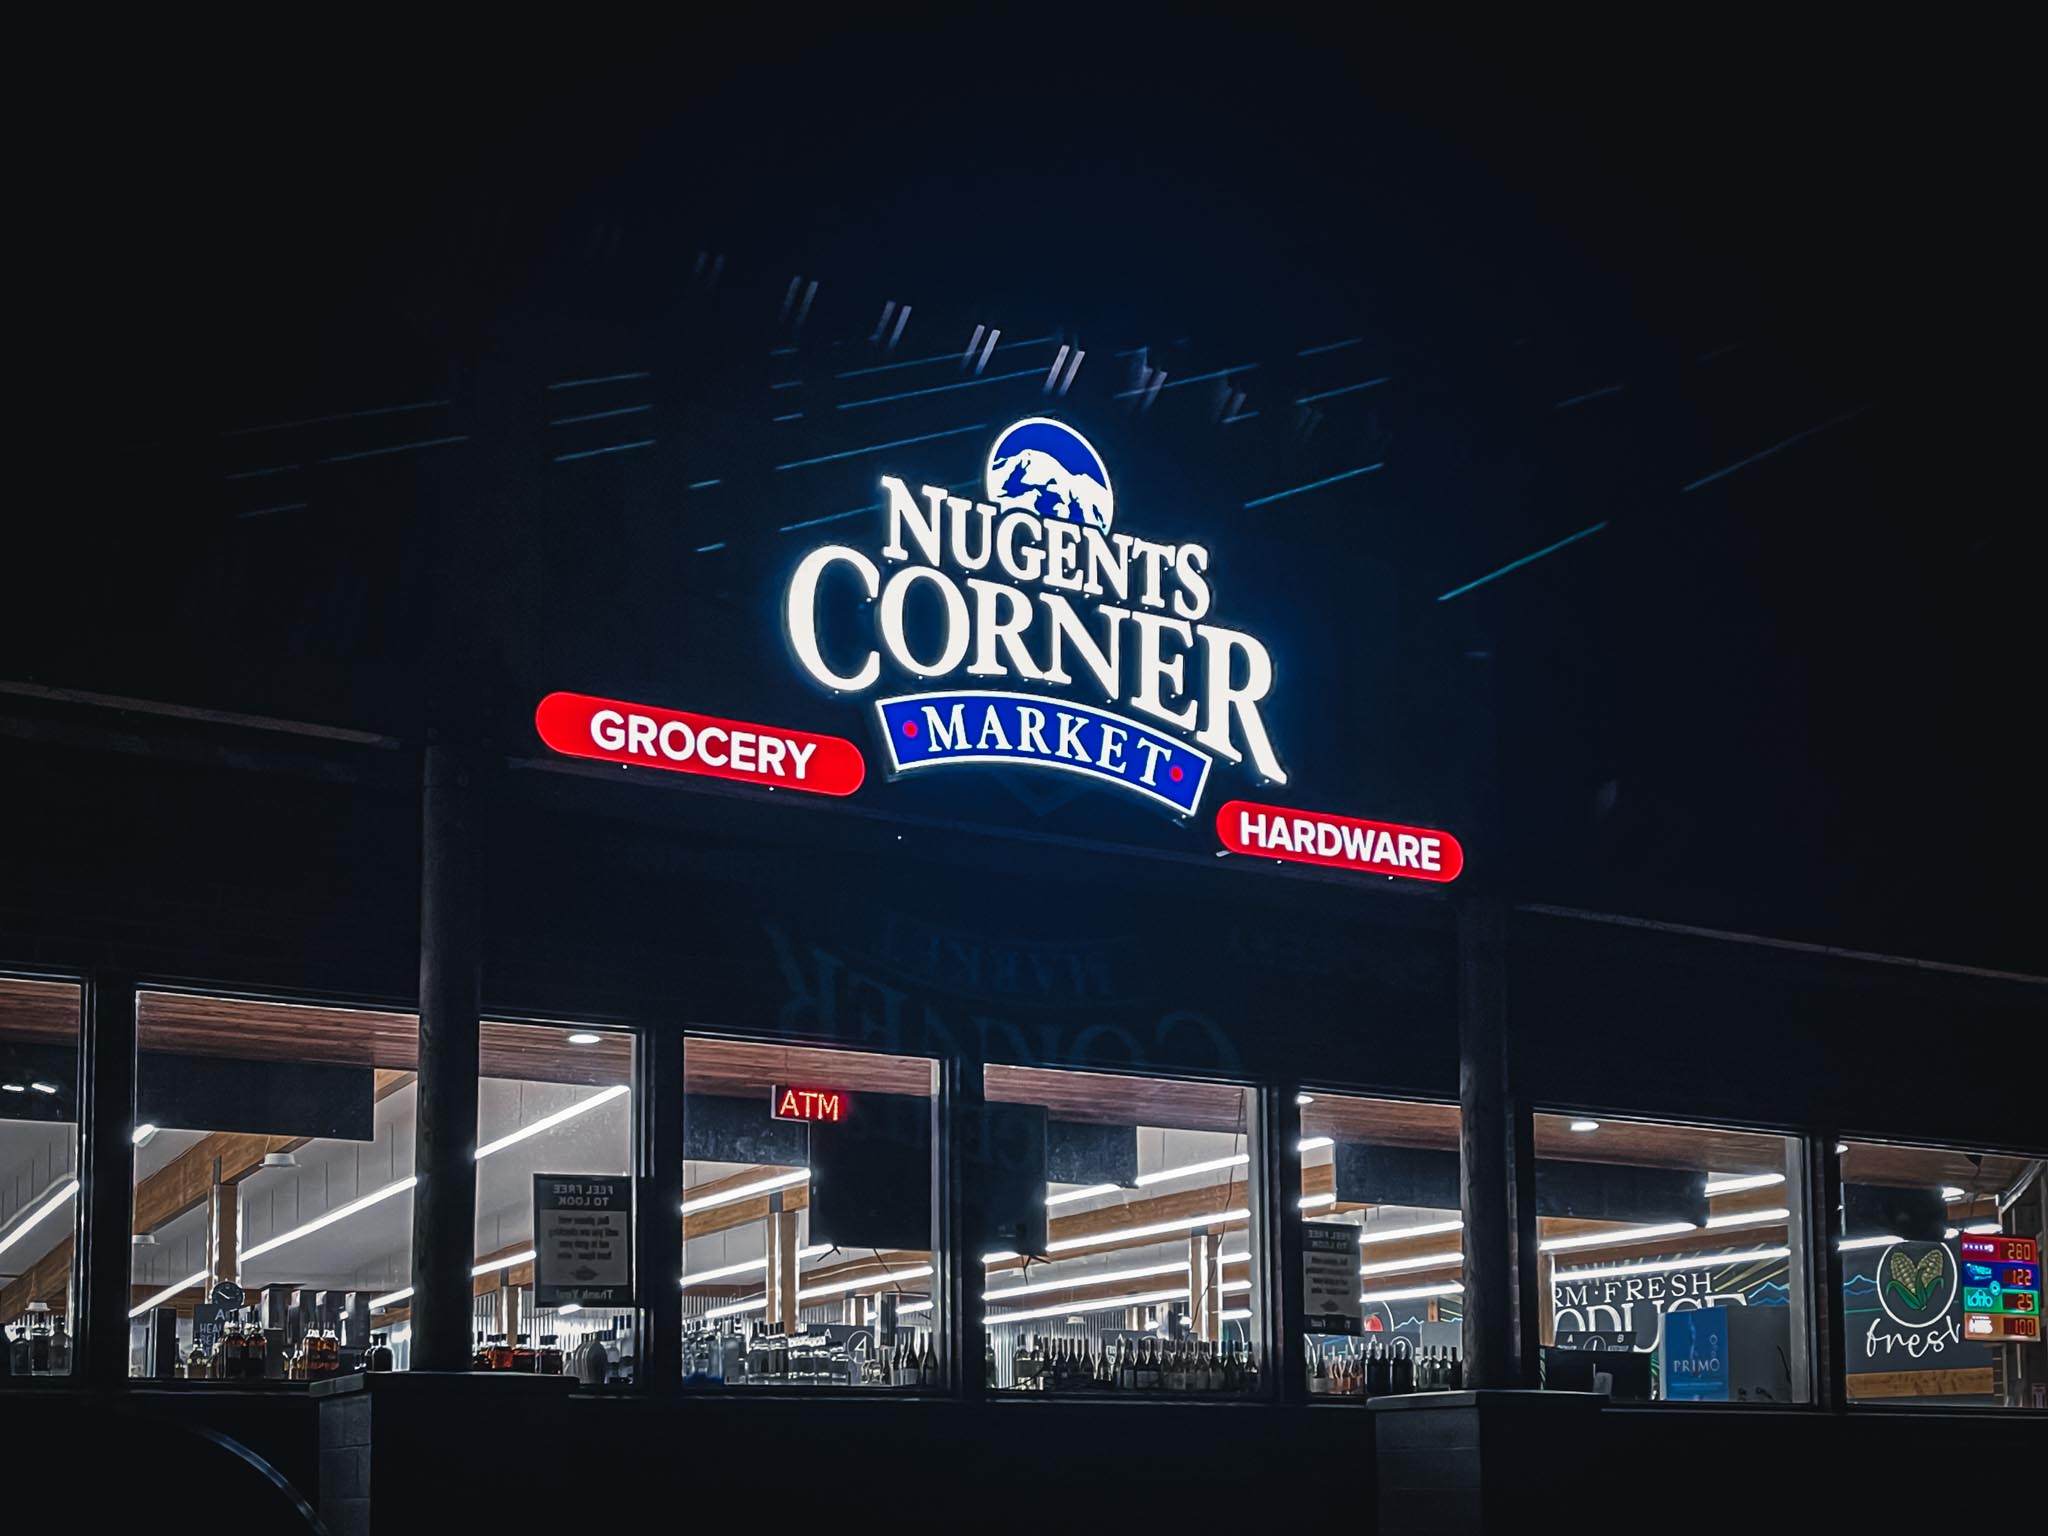 grocery-nugents-corner-Illuminated-channel-letter-sign-at-night